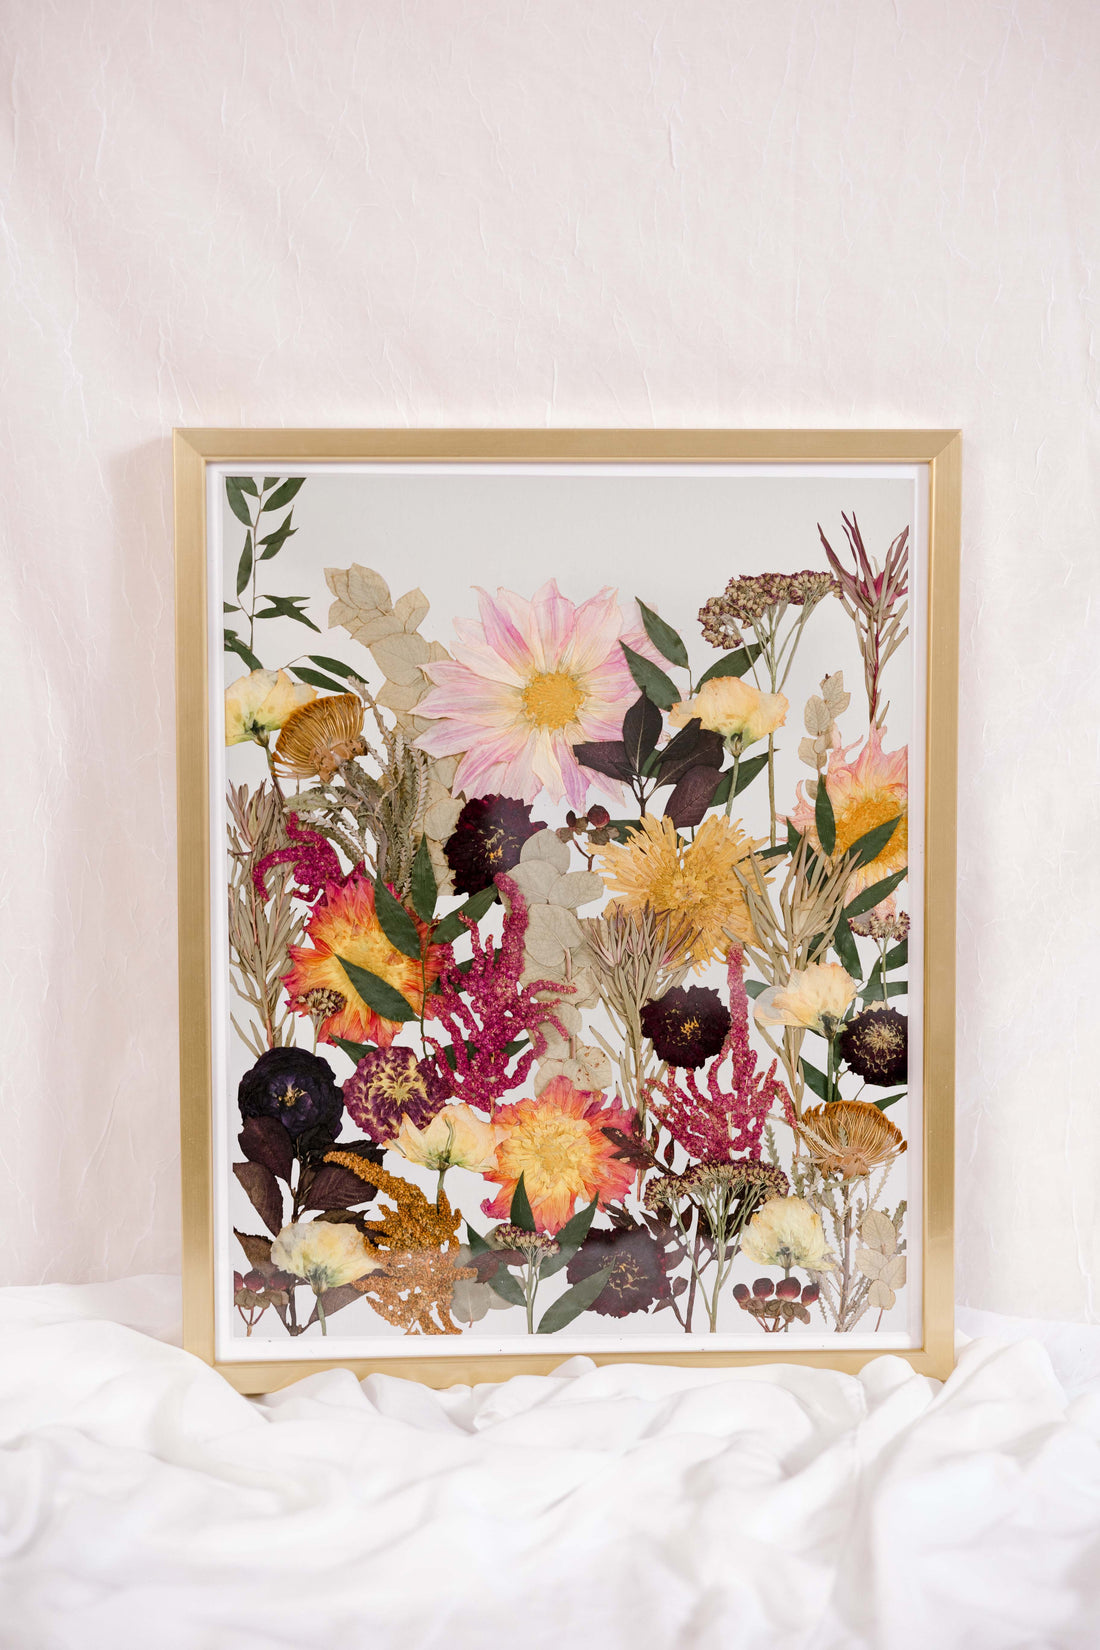 Vintage Framed Dried Pressed Flowers White Background 8.75x11”